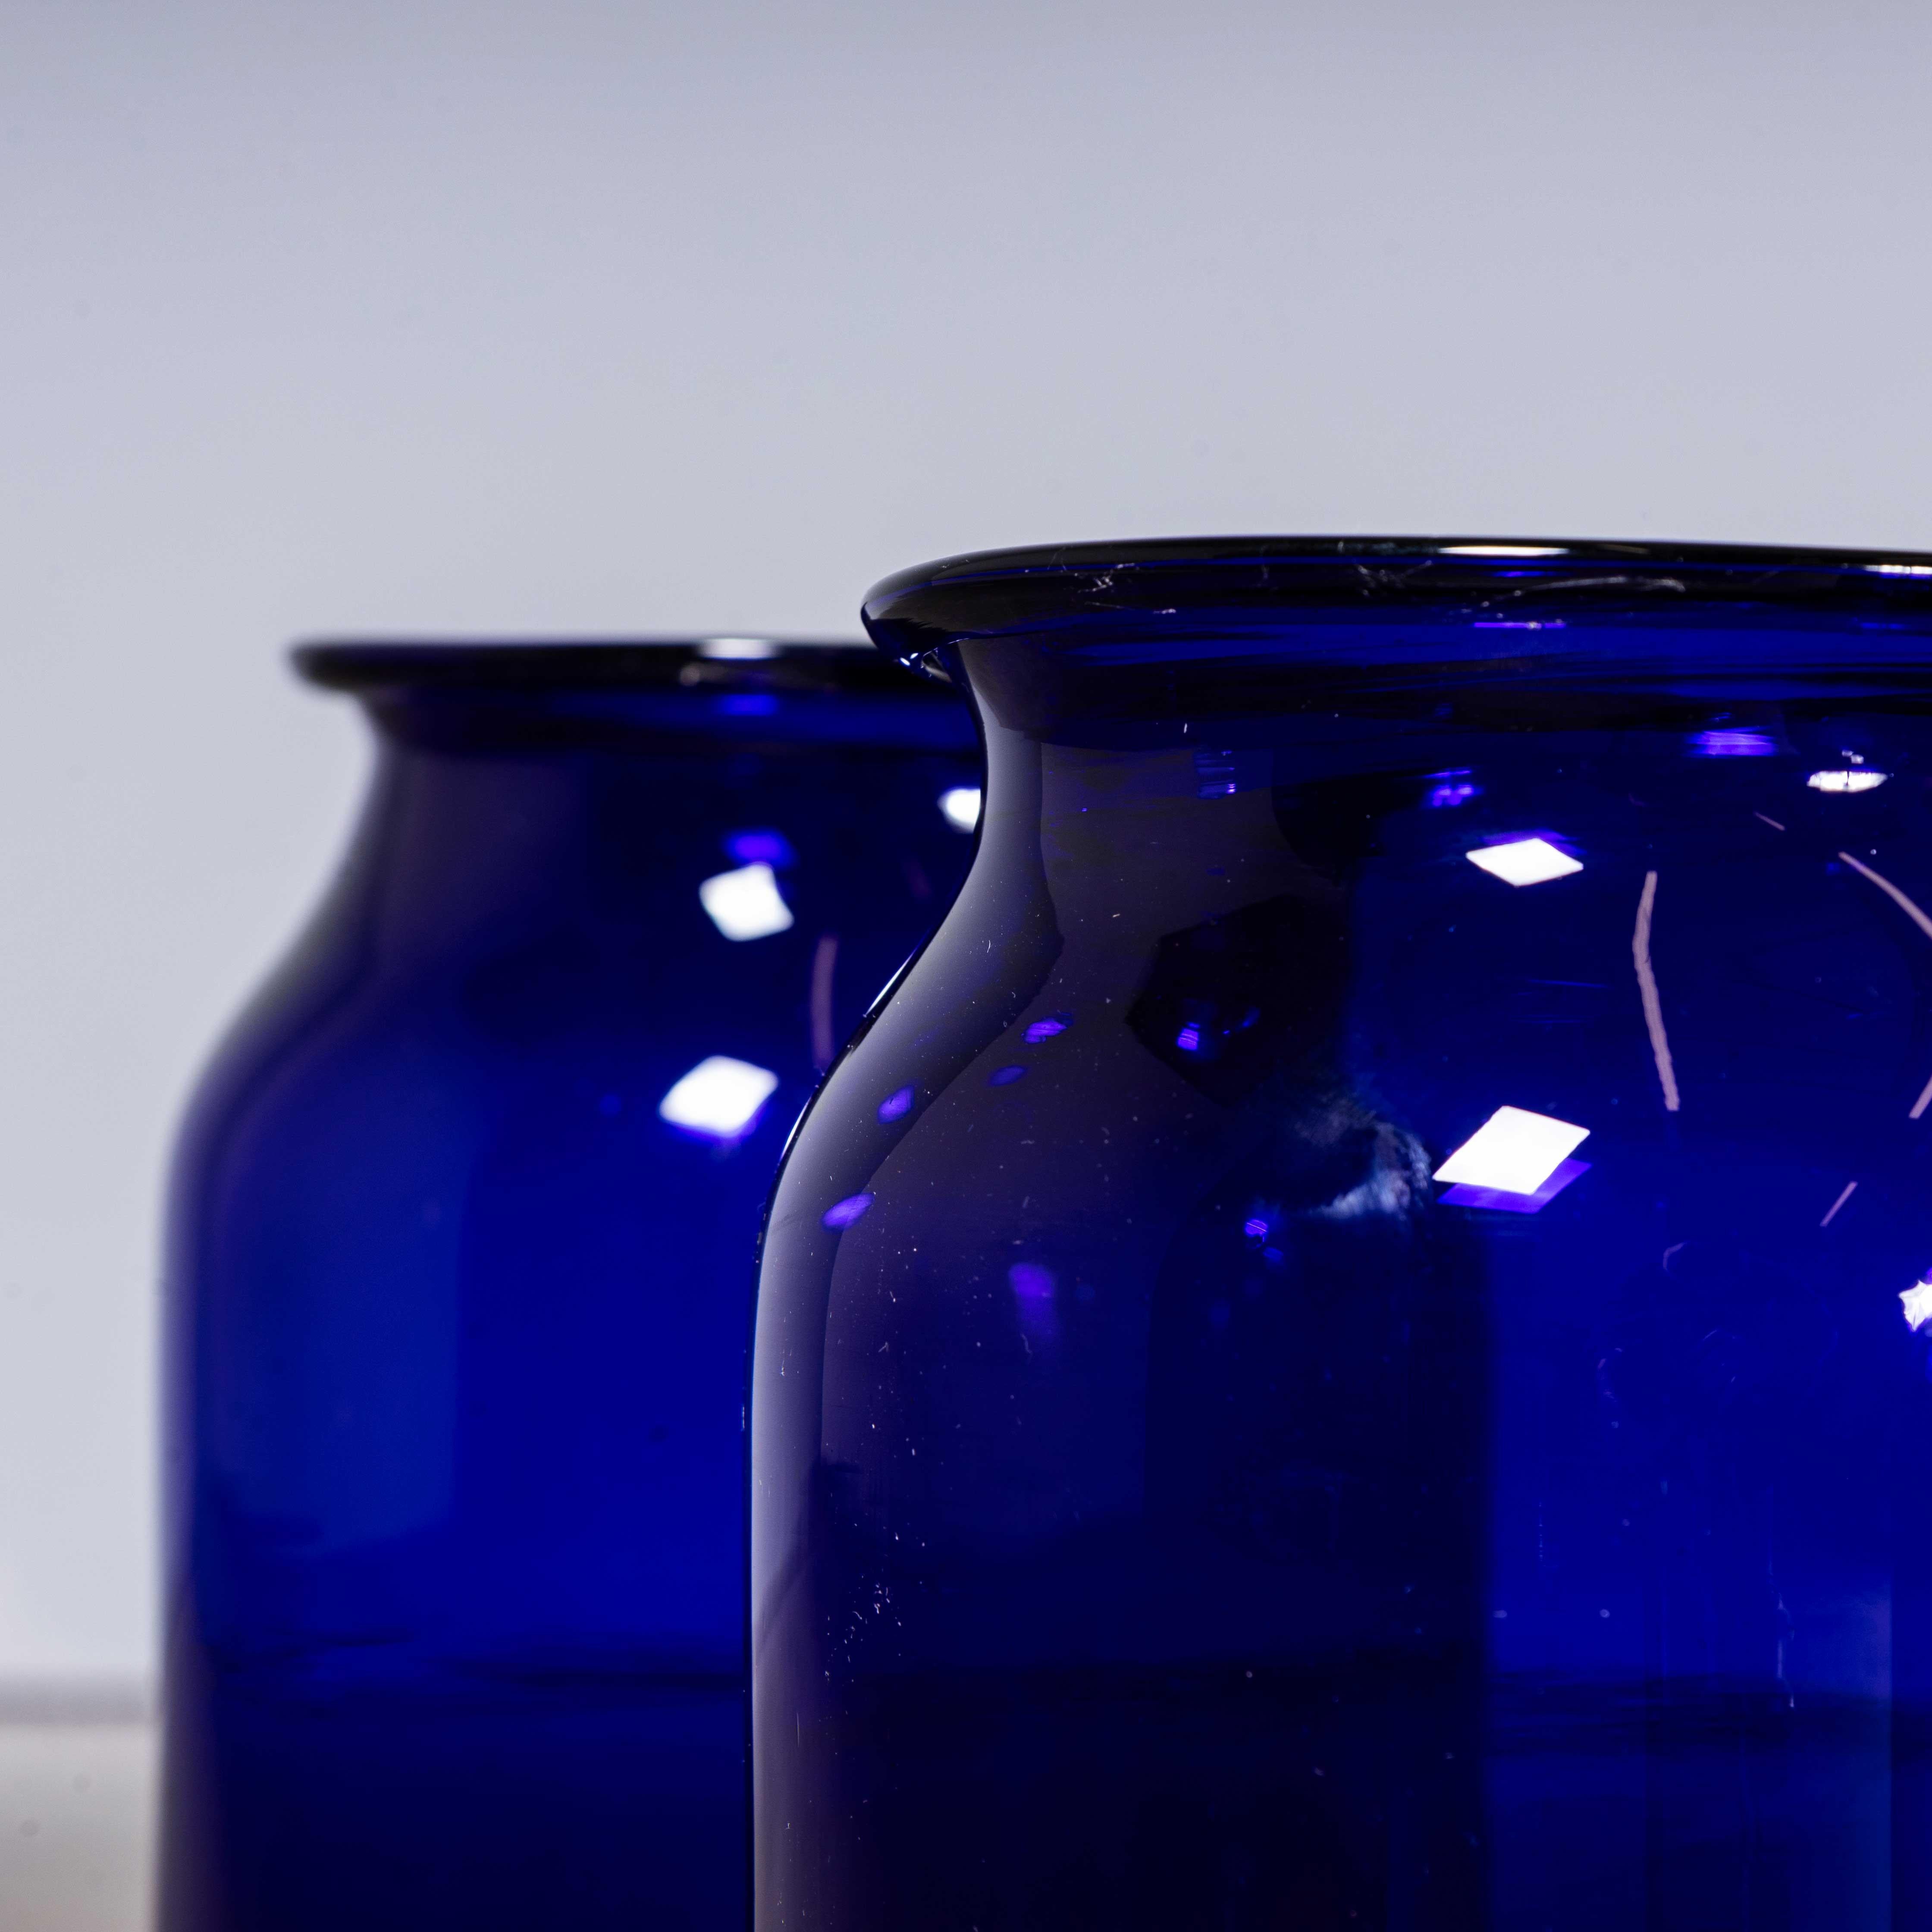 Cobalt Blue Glass Jar – Tall Vase – Mouth Blown
Cobalt Blue Glass Jar – Tall Vase – Mouth Blown. These are contemporary vases made for us in Hungary. They are heavy thick glass mouth blown with hand rolled tops in the most beautiful rich cobalt